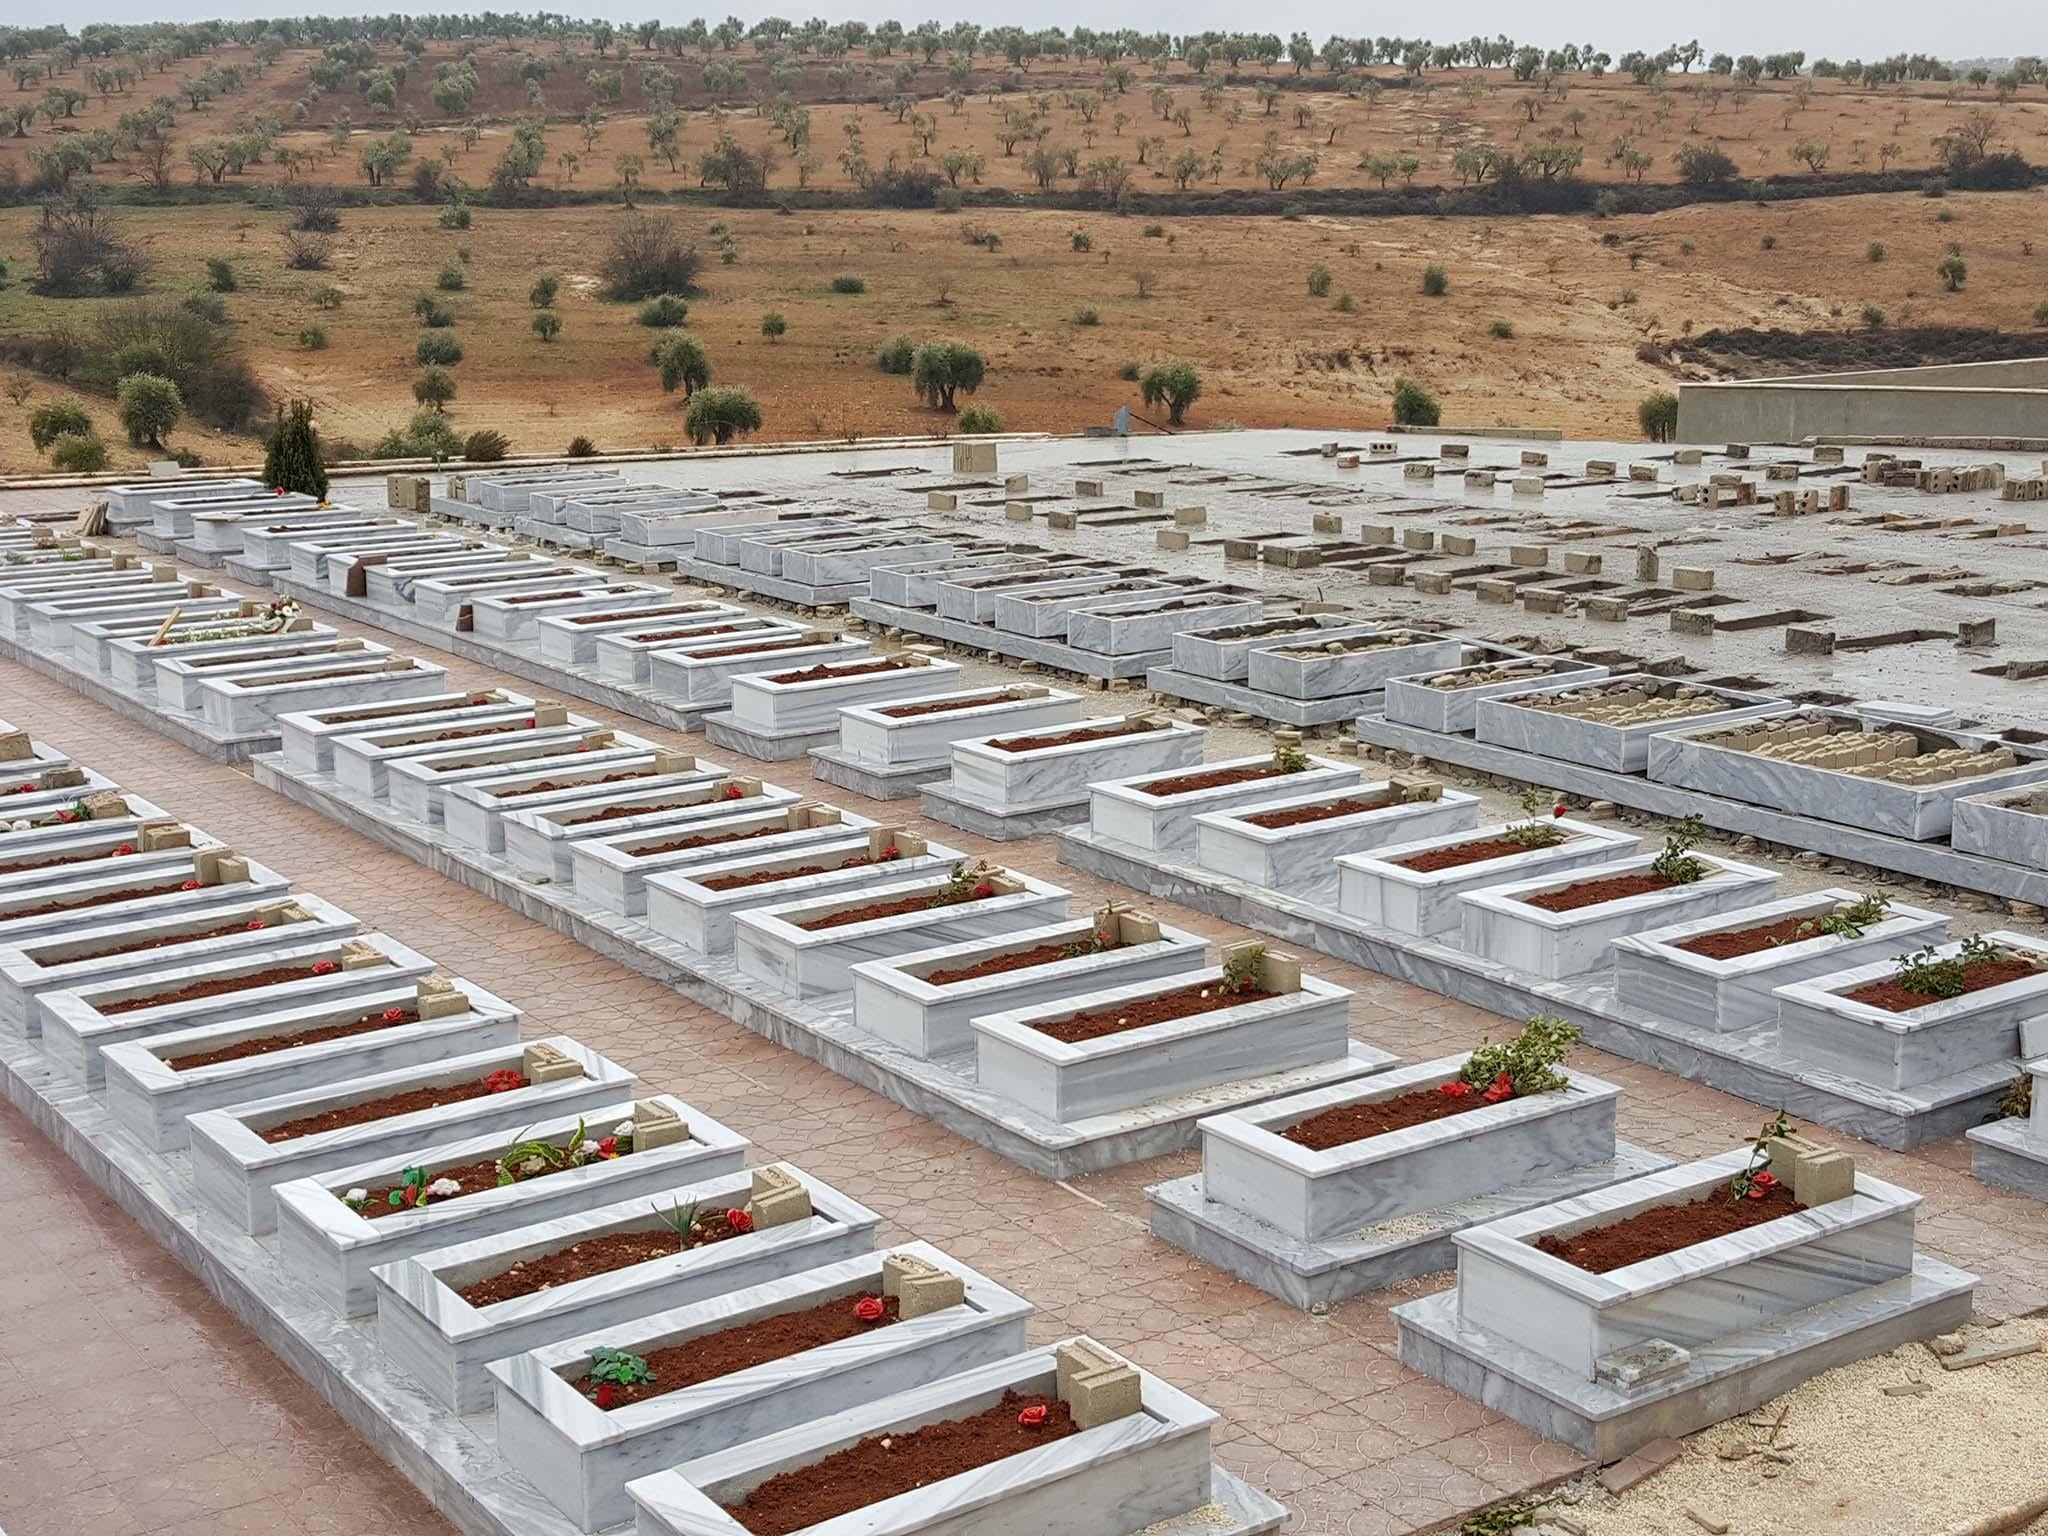 The Kurdish ‘martyrs’ cemetery outside Afrin. Many of the dead in the marble graves were killed fighting Isis during the Syrian war